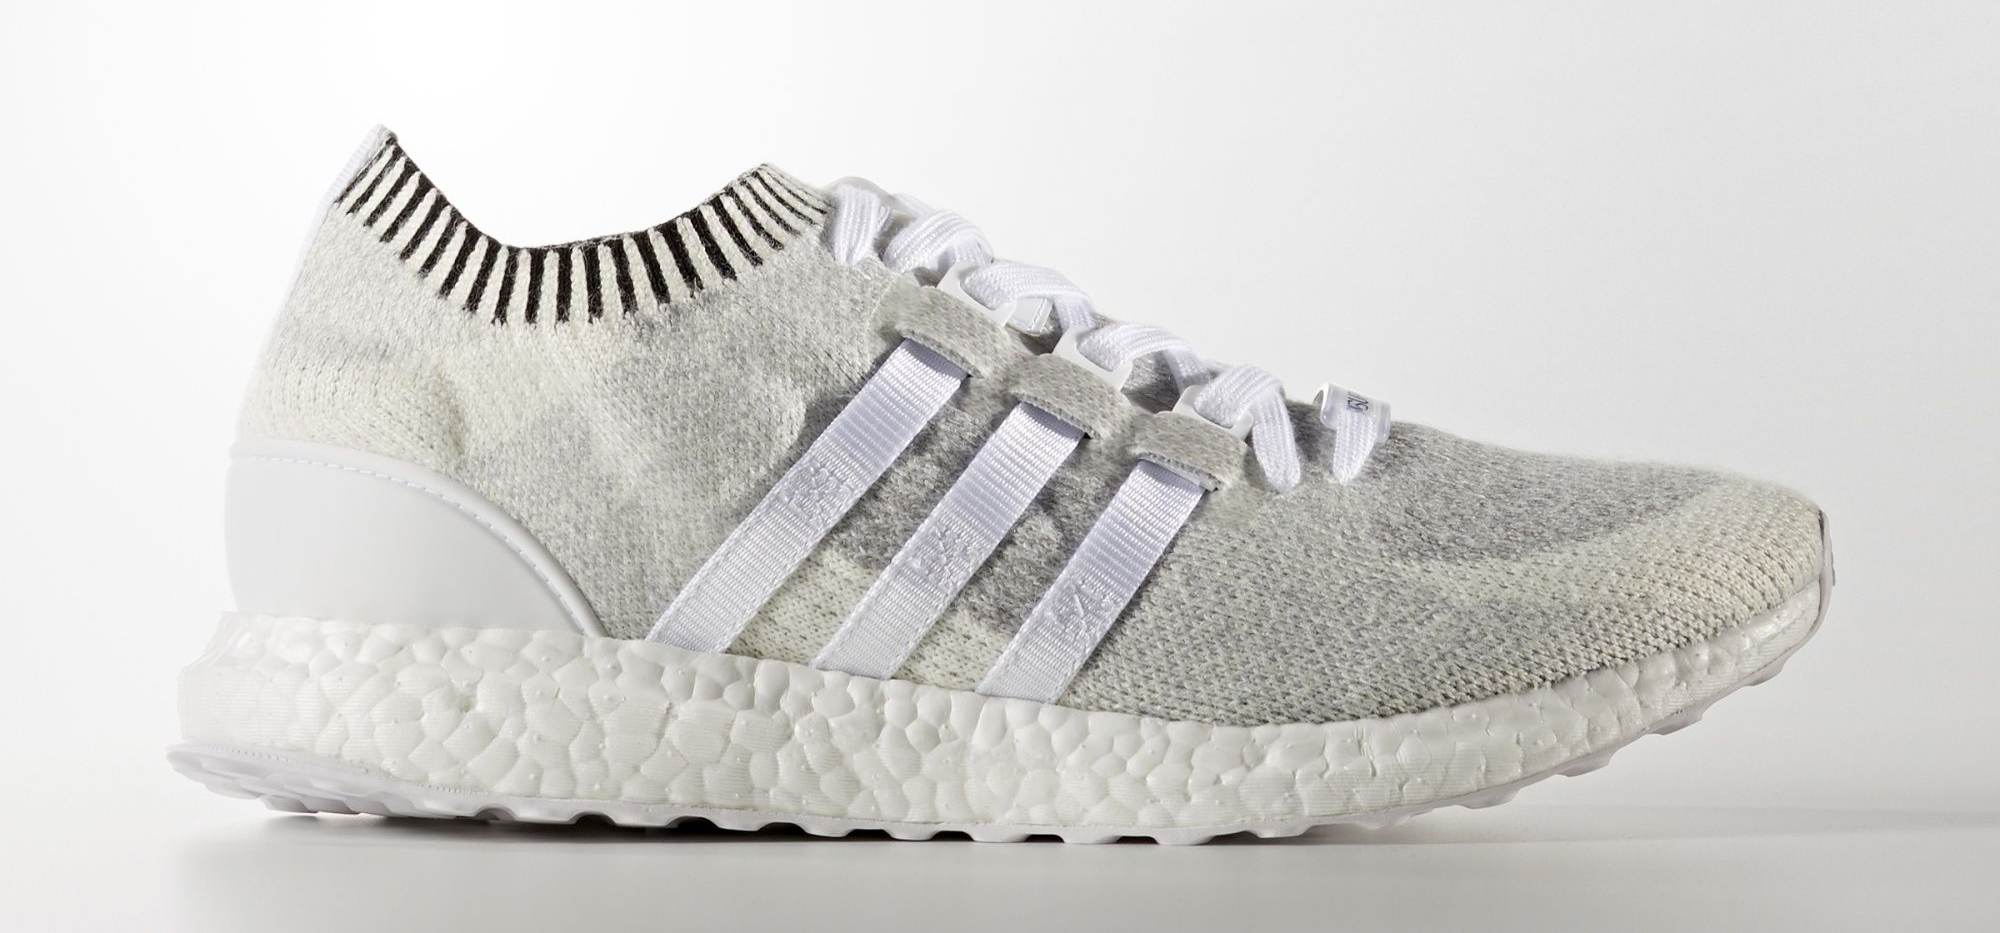 adidas-eqt-support-ultra-pk-vintage-white-1